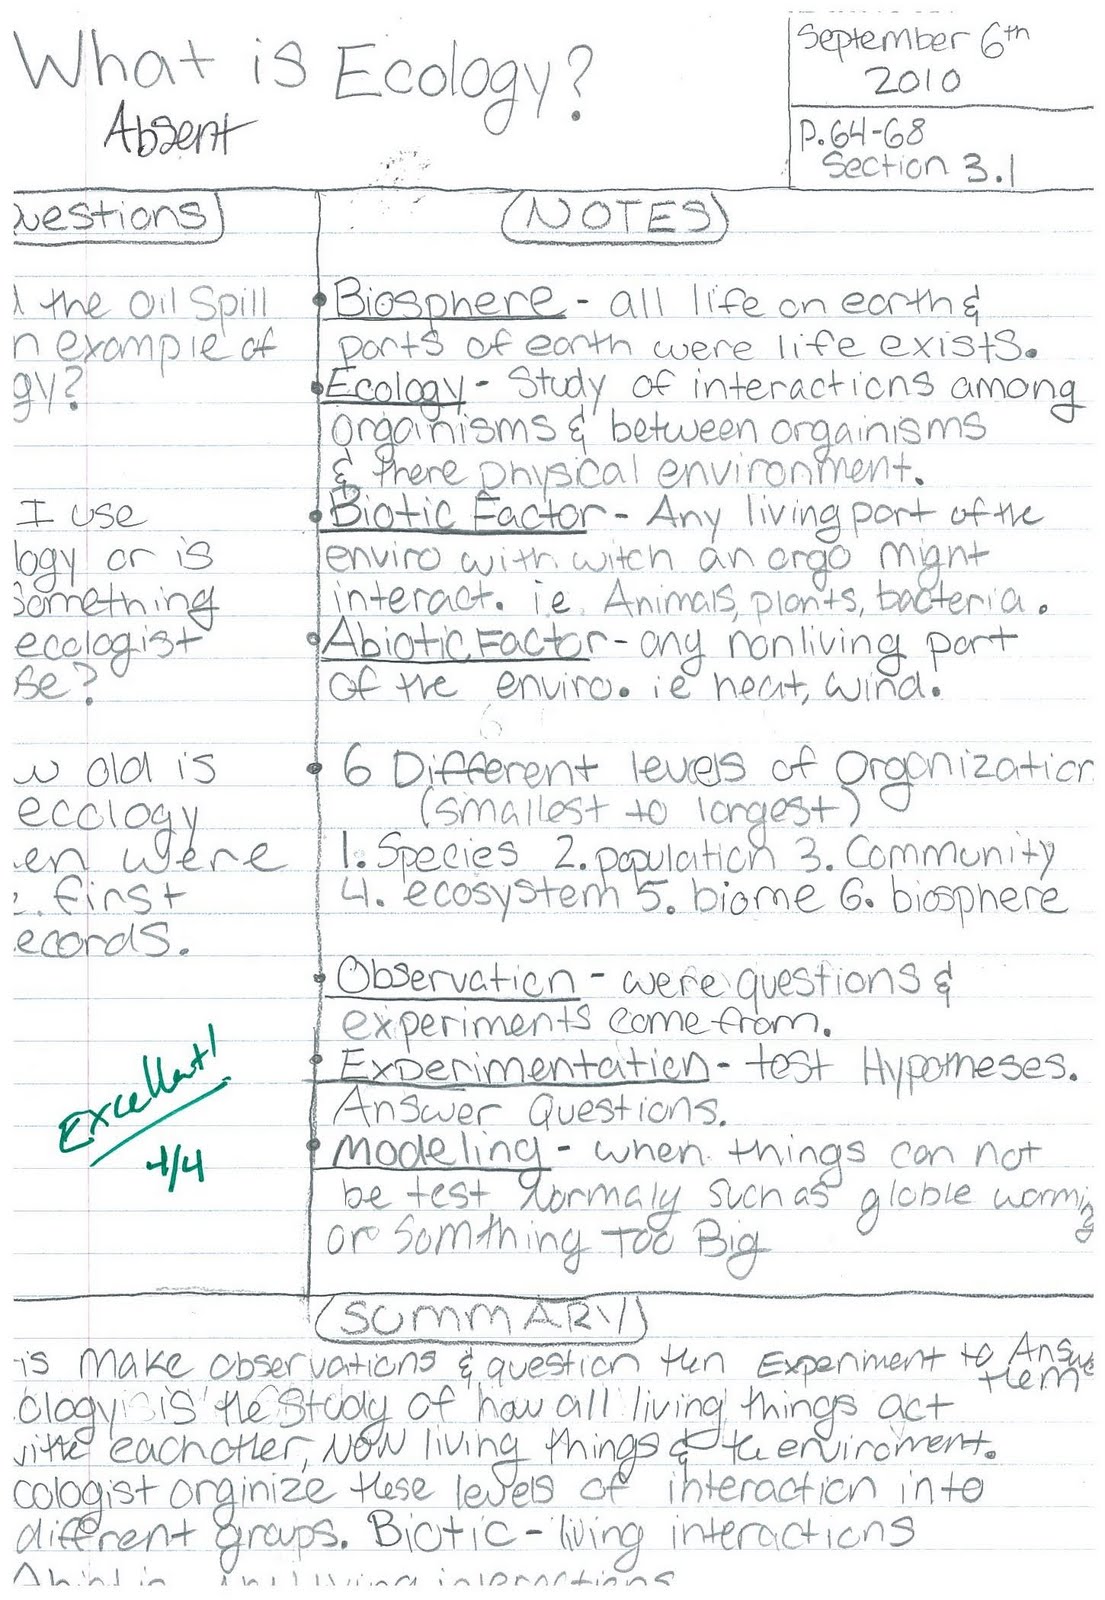 Mrs. Stein's 2nd Period STS Biology: Cornell Notes